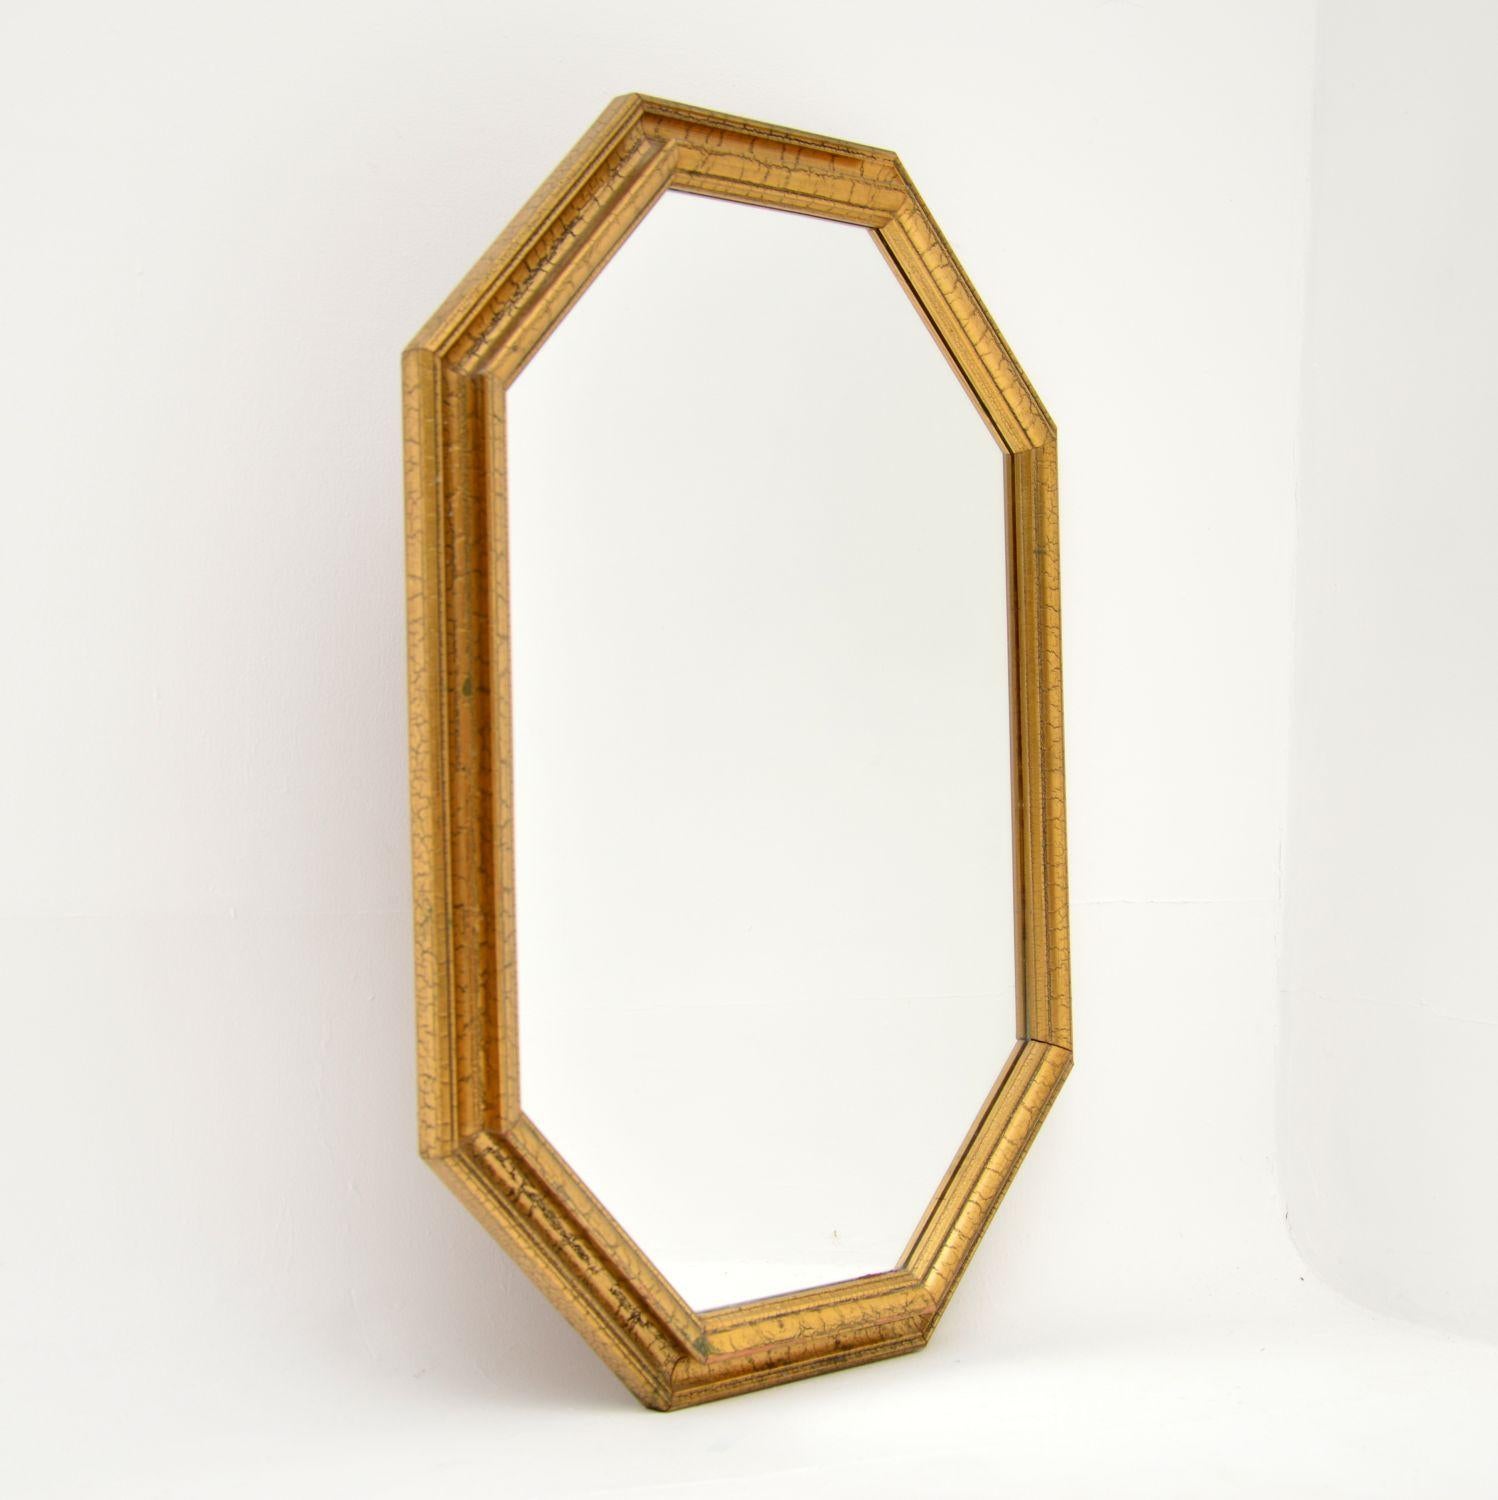 A beautiful vintage Italian gilt wood mirror. This dates from around the 1950’s.

It is of super quality and is a lovely size. The octagonal gilt wood frame has a wonderful slightly distressed finish.

The condition is excellent for its age,